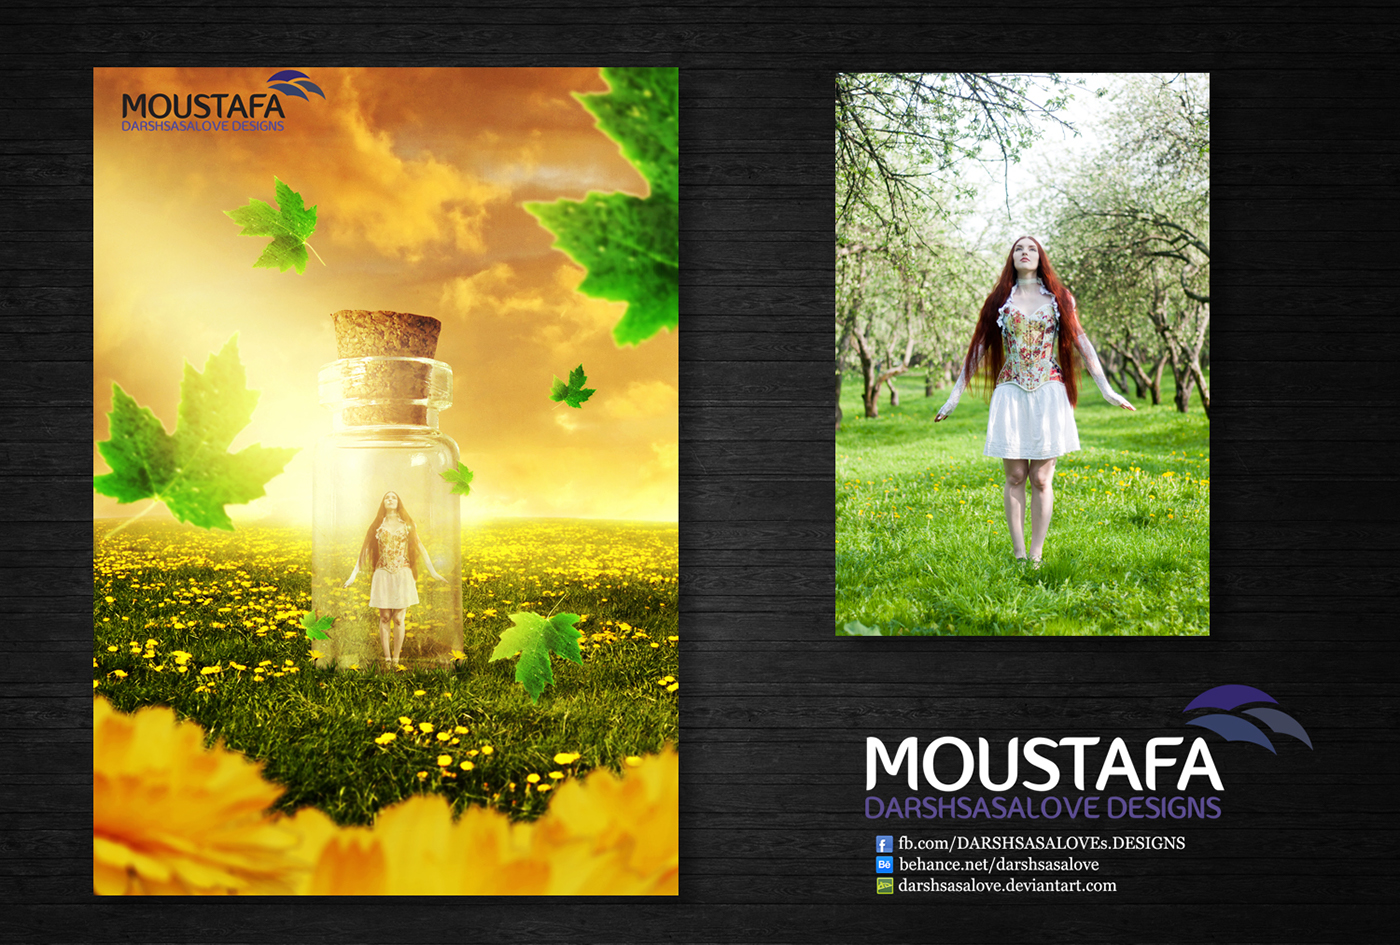 photo-manipulation photomanipulation Photo Manipulation  darshsasalove designs darshsasalove  moustafa sharf Before and After before after